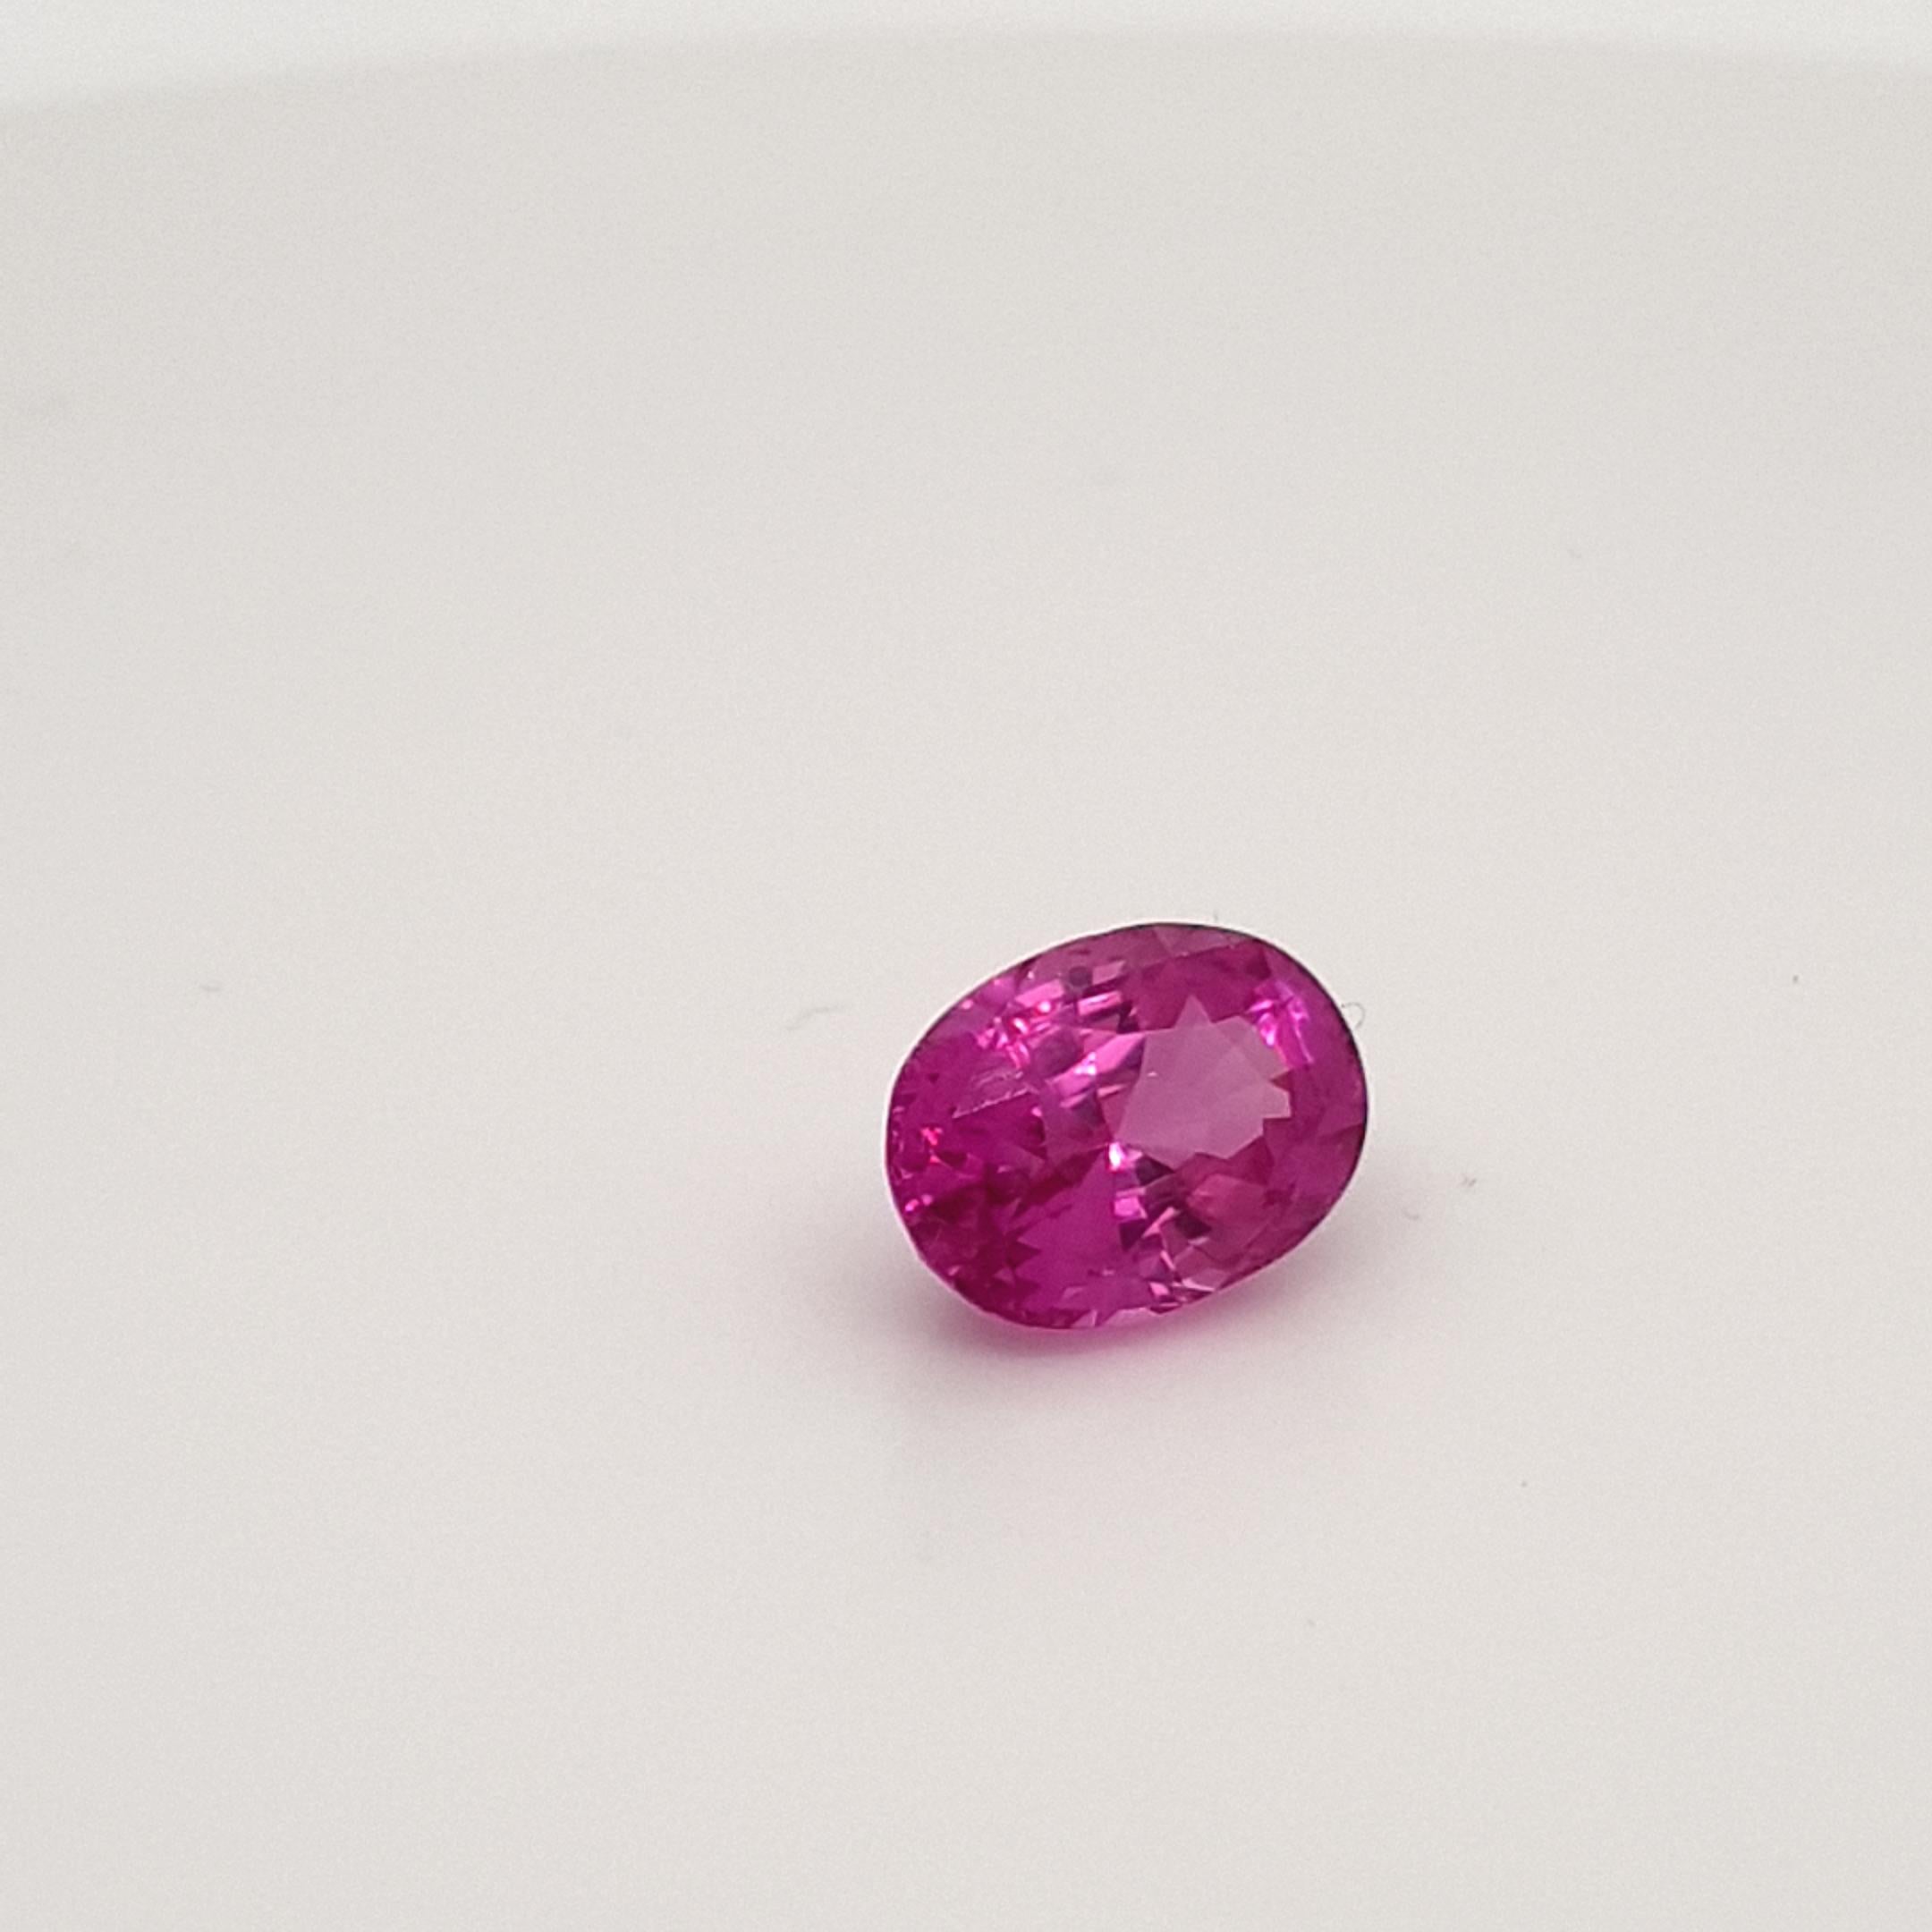 Contemporary Purple Pink Sapphire, No Heat, Certified Gem, 4, 46 Ct., Loose Gemstone For Sale